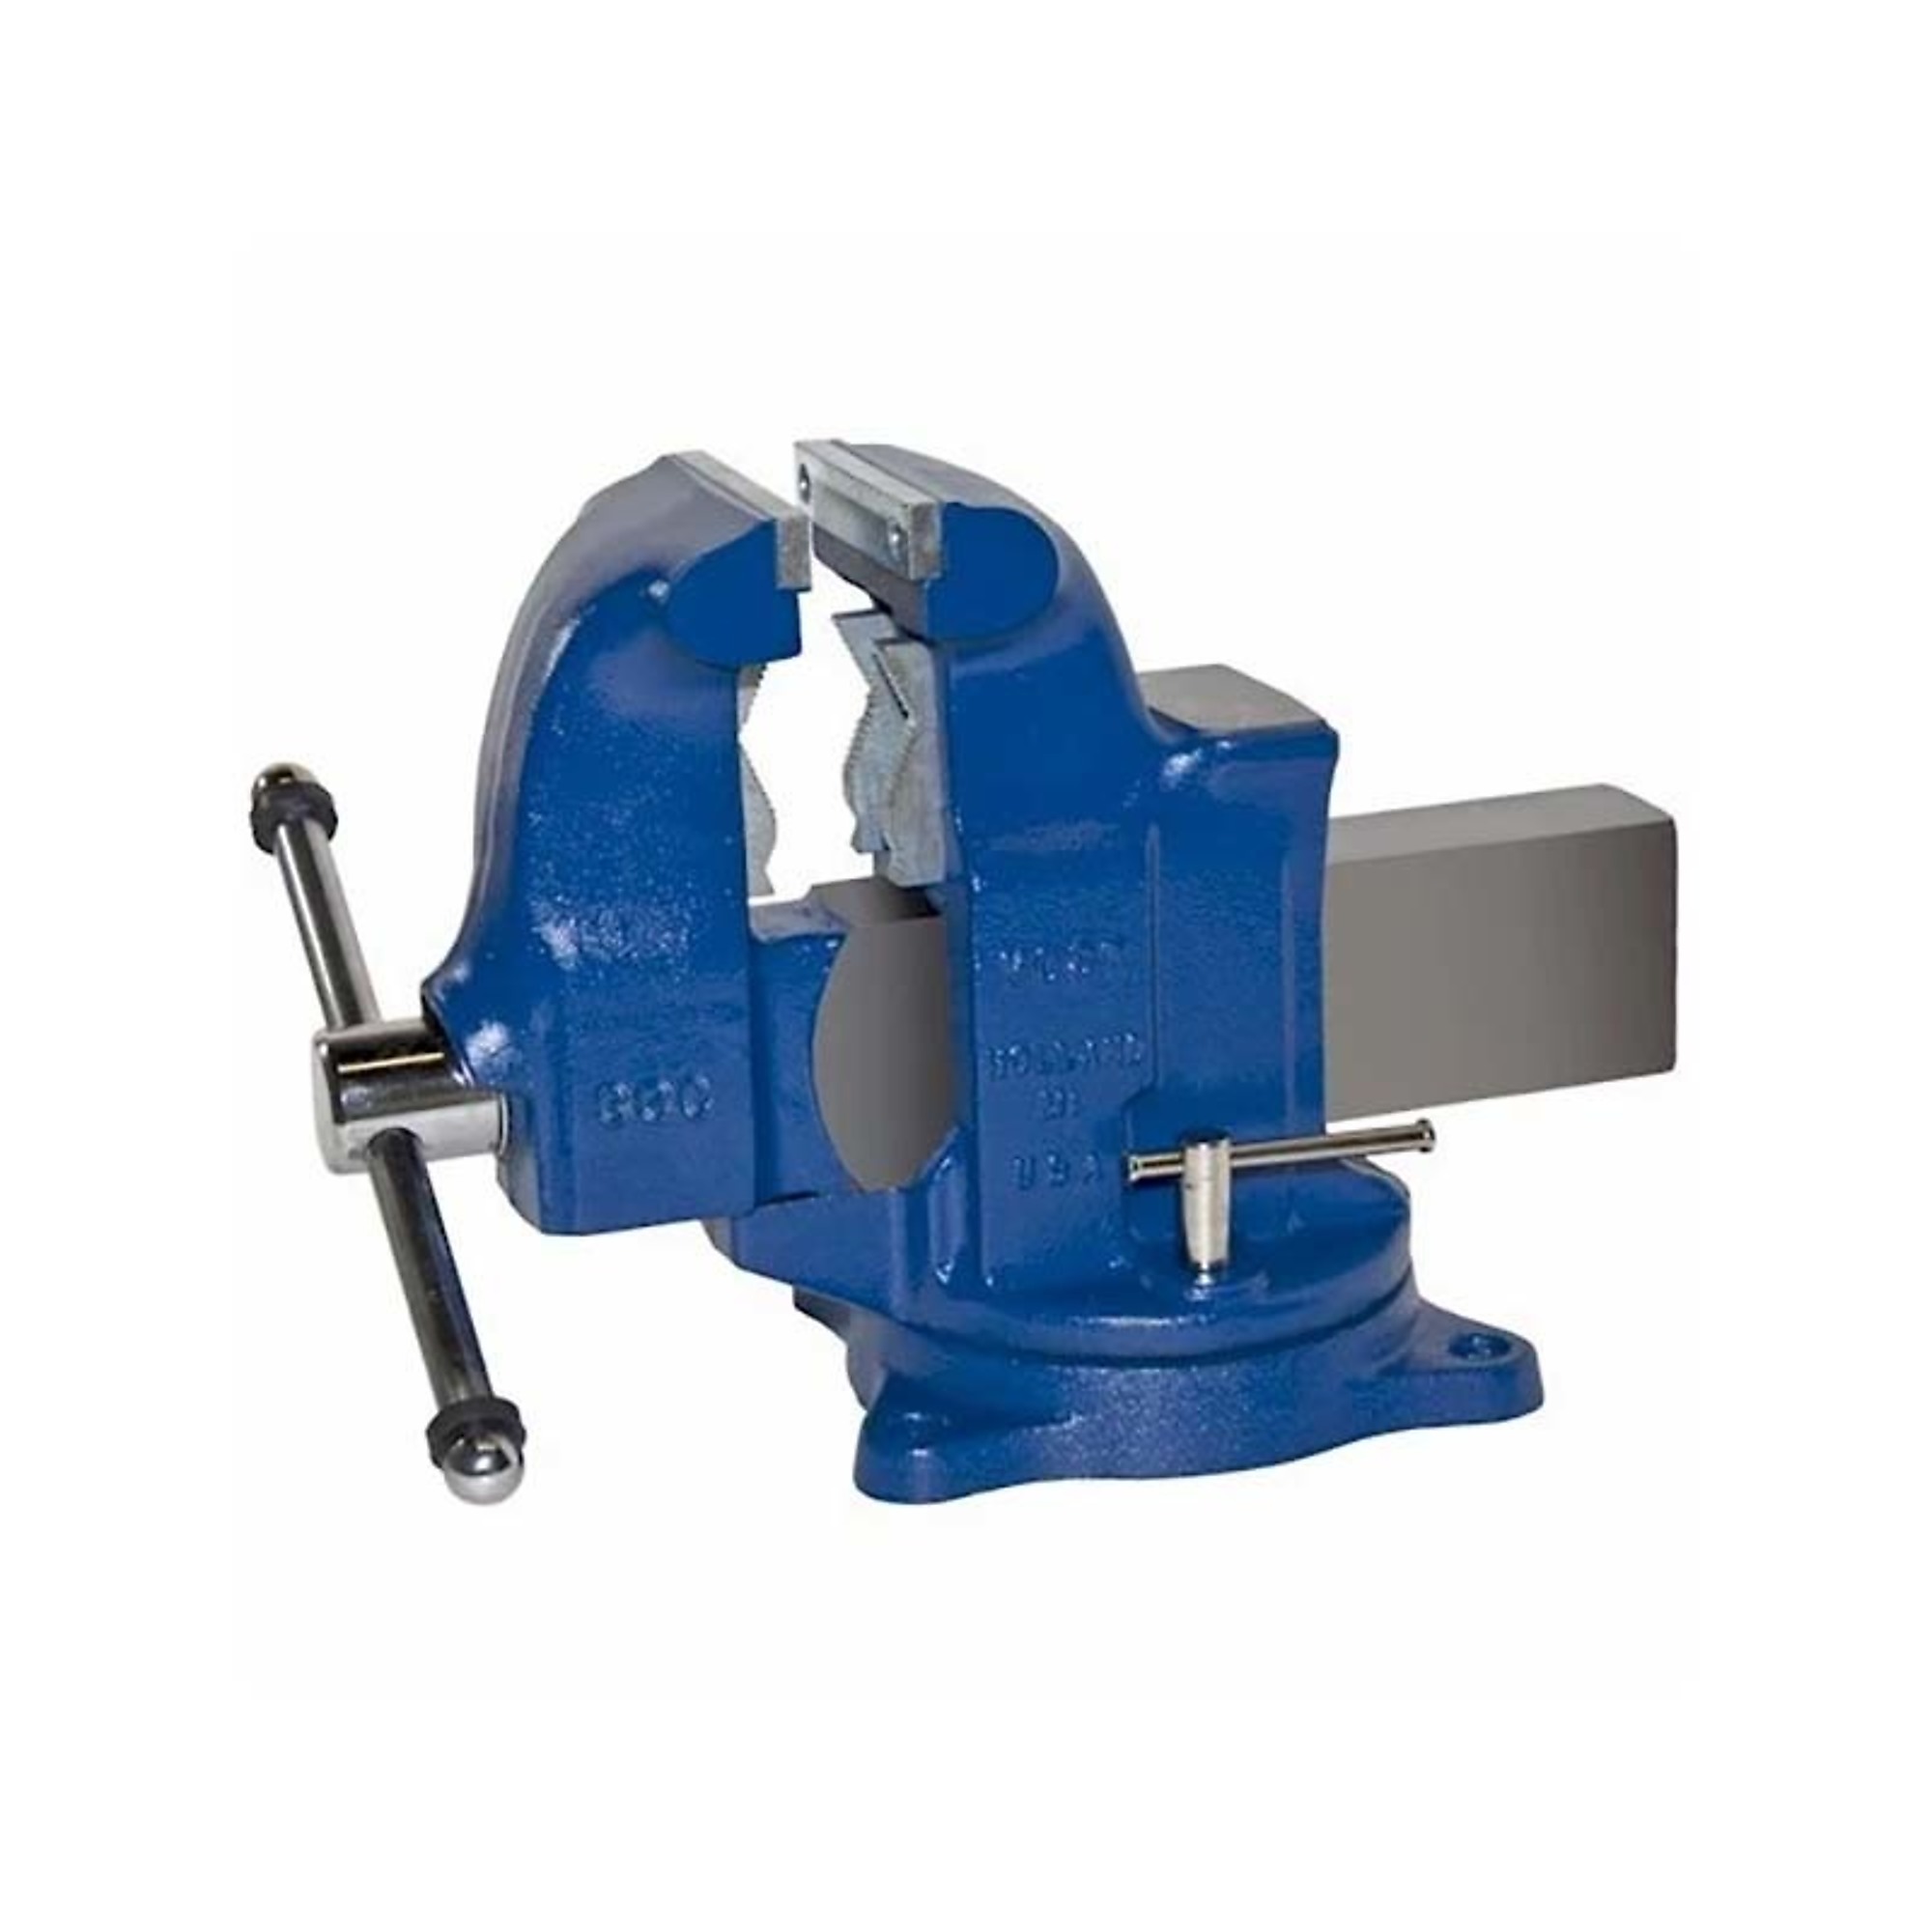 Yost Vises, 5Inch HD Combo Vise, Jaw Width 5 in, Jaw Capacity 7.5 in, Material Ductile Iron, Model 33C